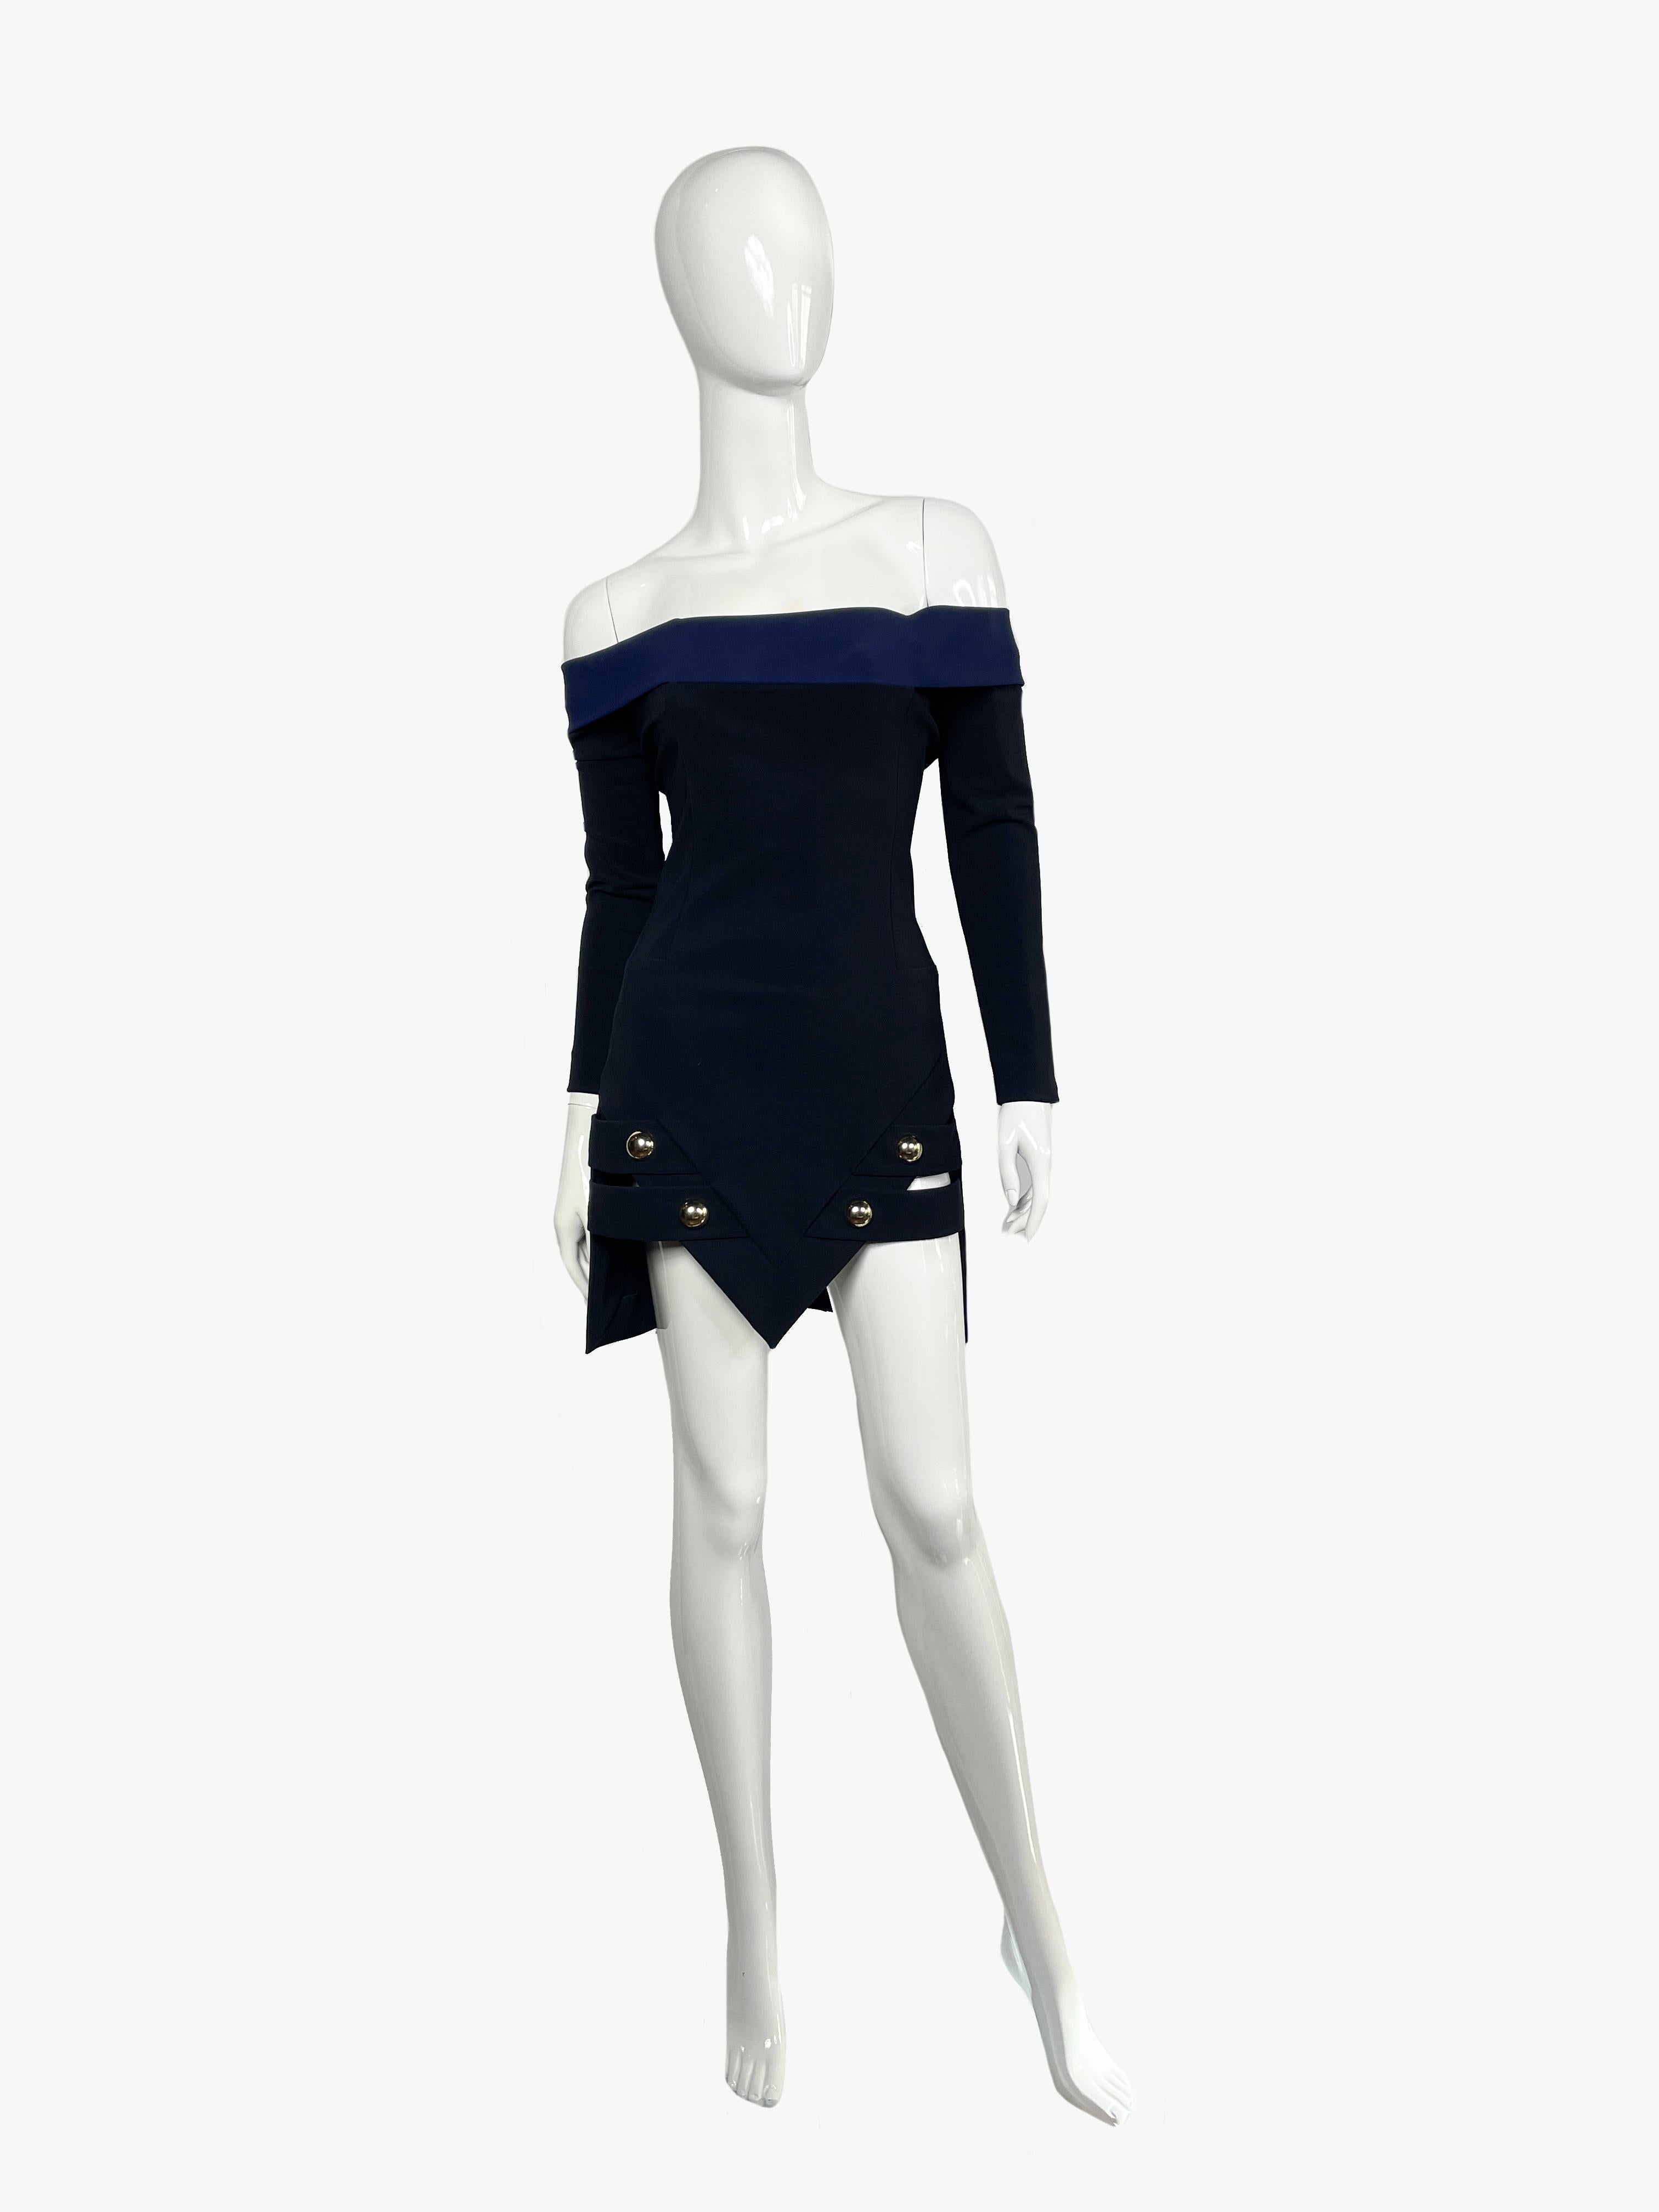 Anthony Vaccarello runway off-the-shoulder mini dress with assimetric hem.
Season: Spring-Summer, 2014 
Colors: black, blue. 
Size – XS 
Length: 71cm
Composition: 72% polyamid, 28% elasthane
Condition: excellent. 
........Additional information